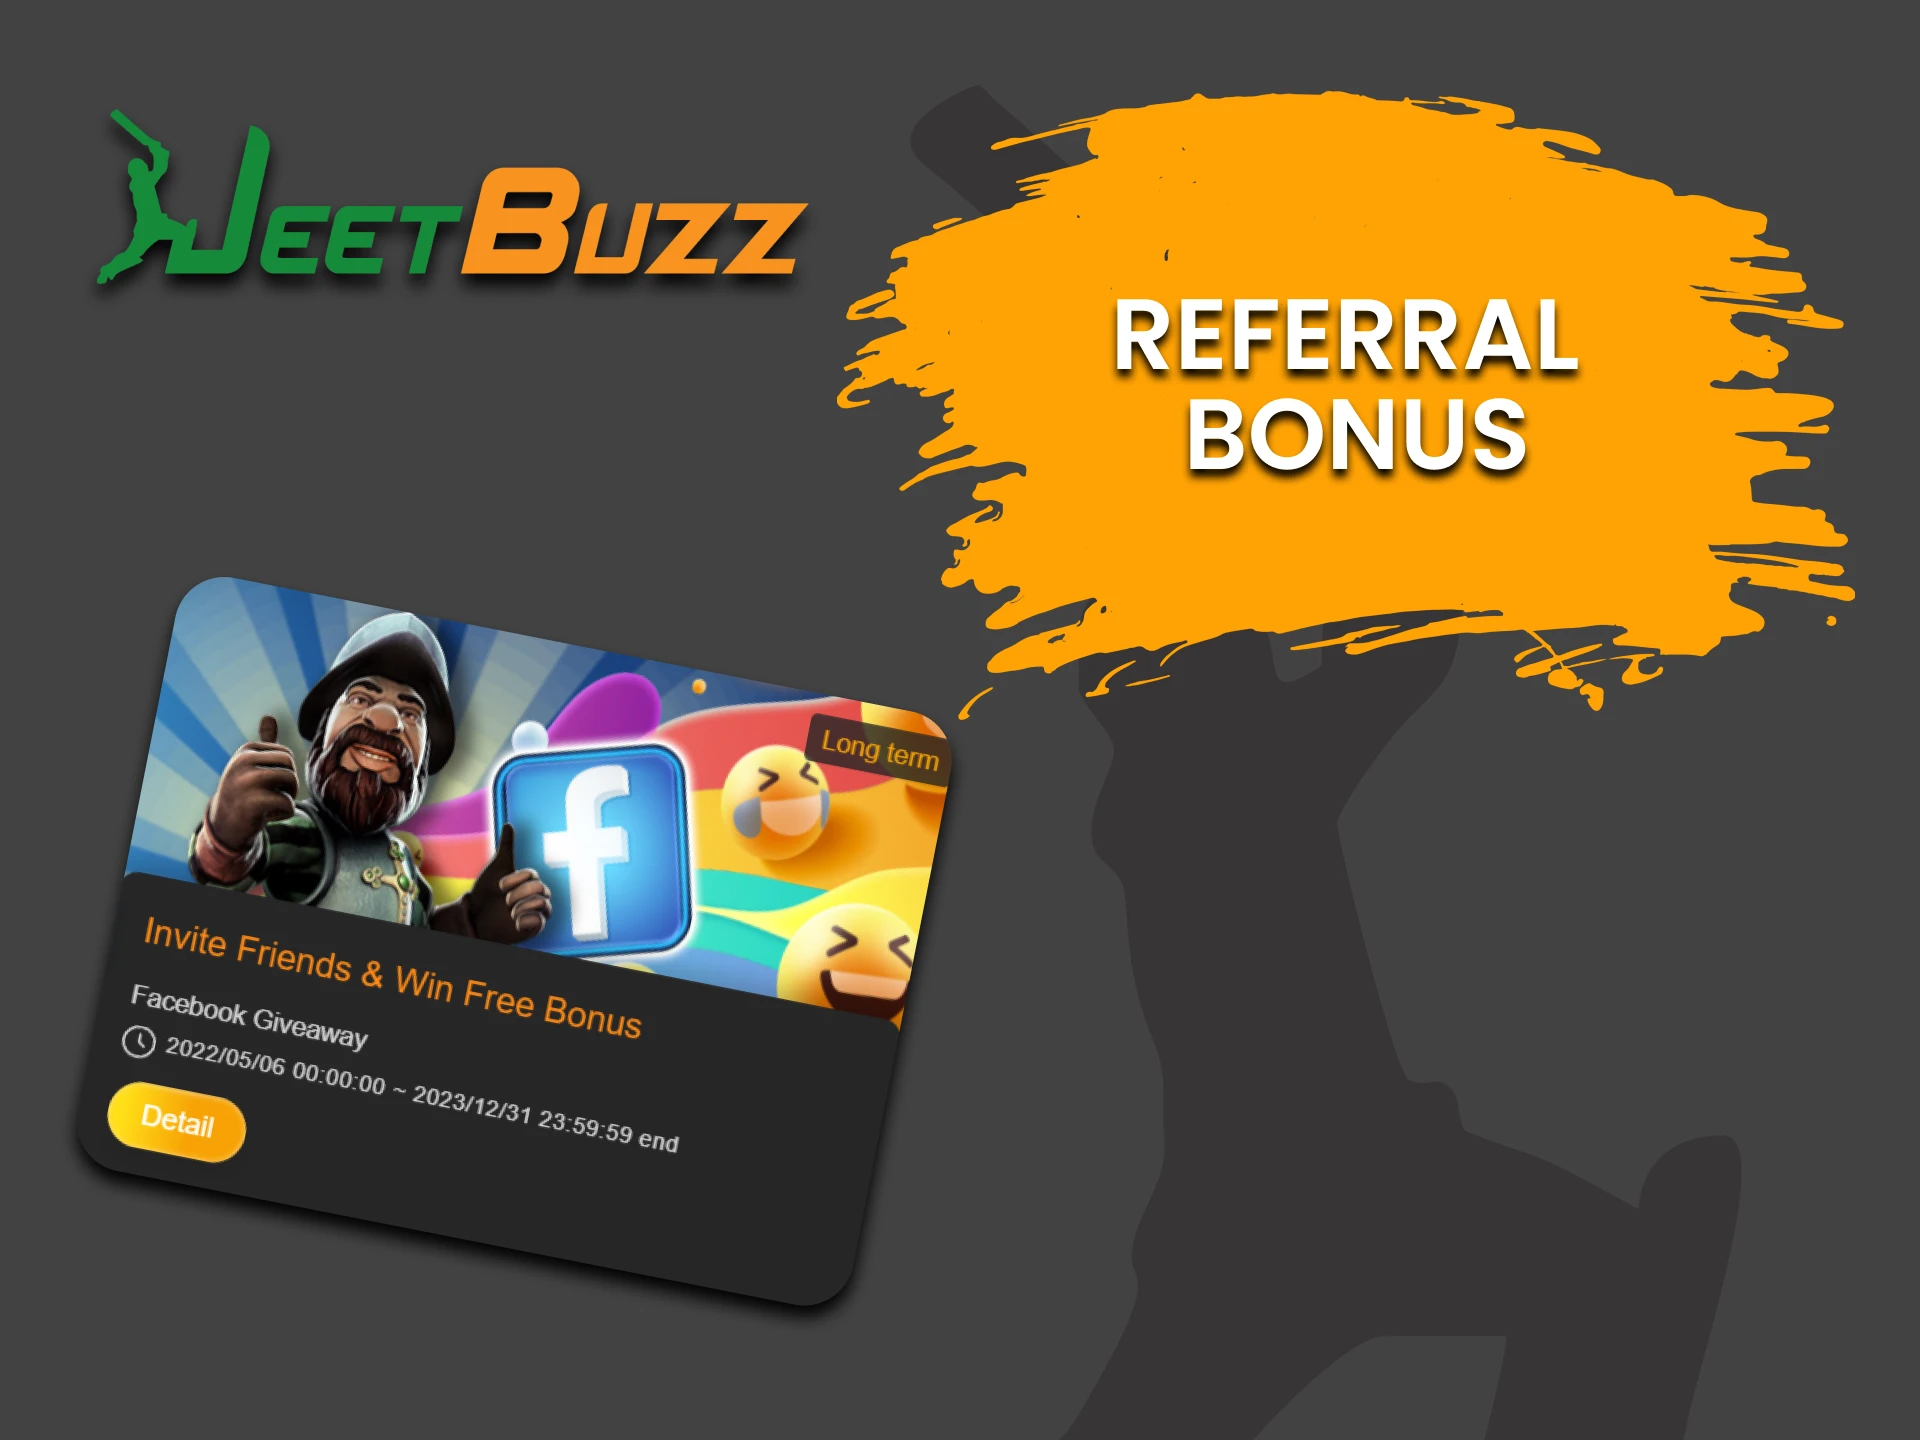 Invite a friend to JeetBuzz to play Roulette and get a bonus.